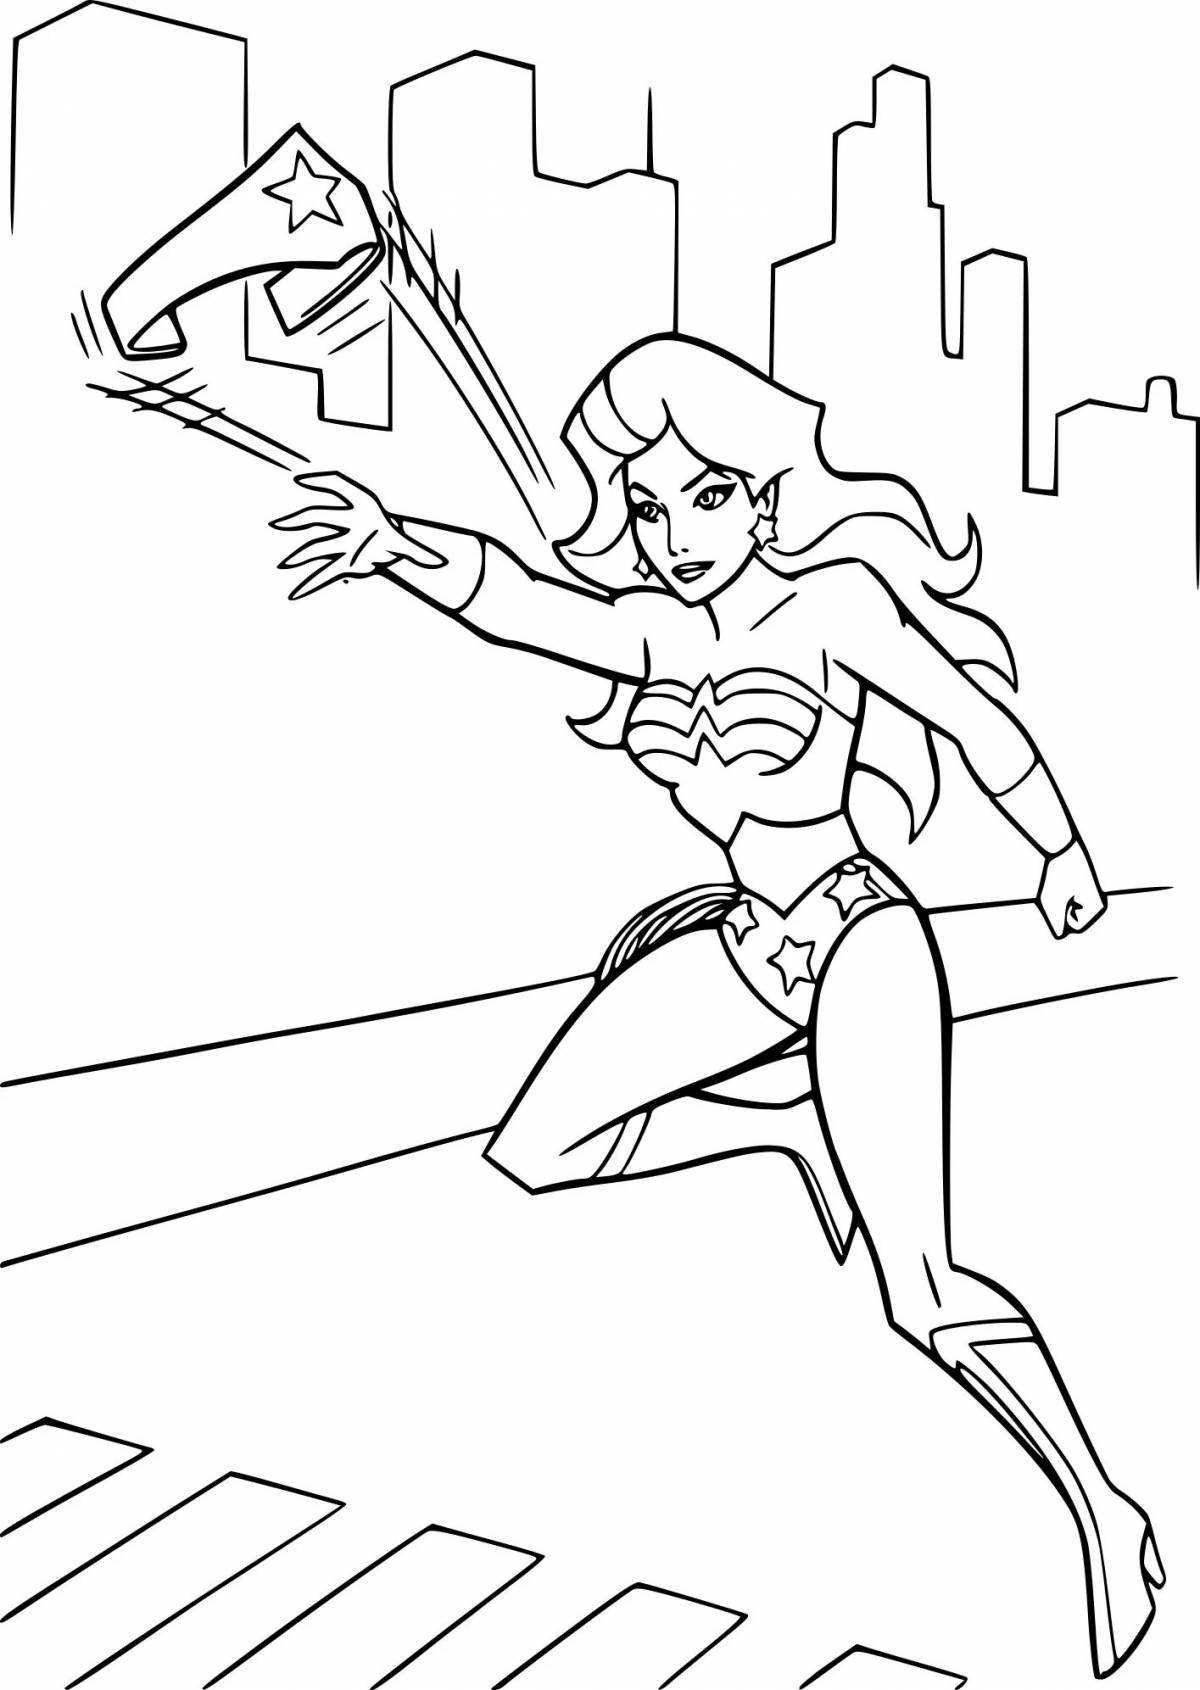 Colorfully illustrated superwoman coloring page